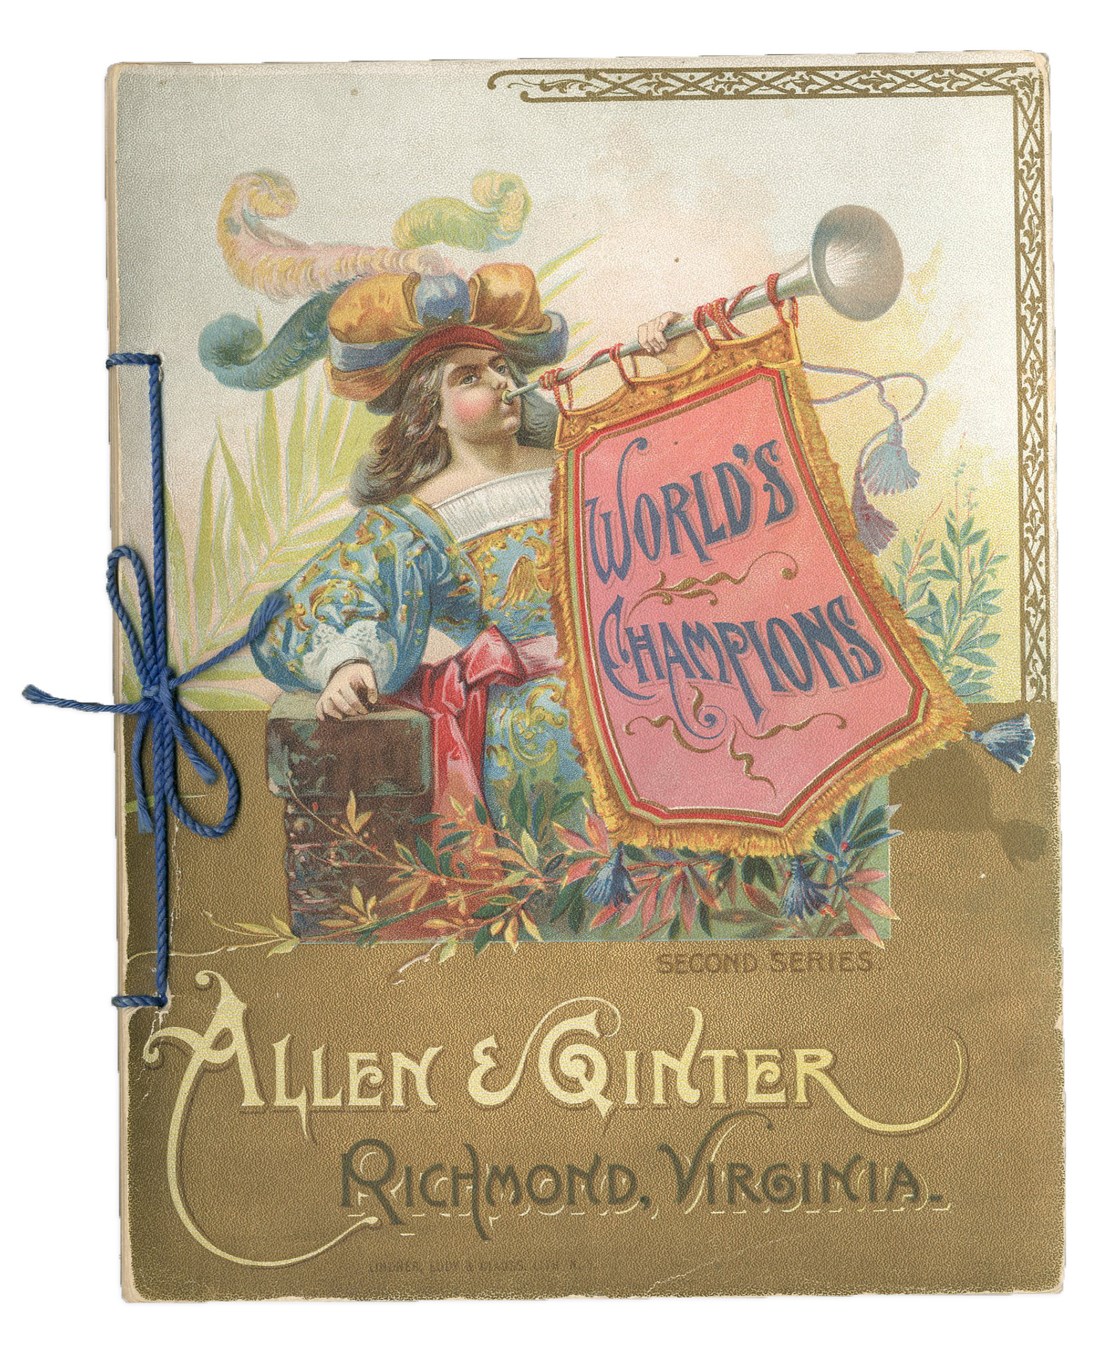 Baseball and Trading Cards - 1888 Allen & Ginter World's Champions Second Series Album